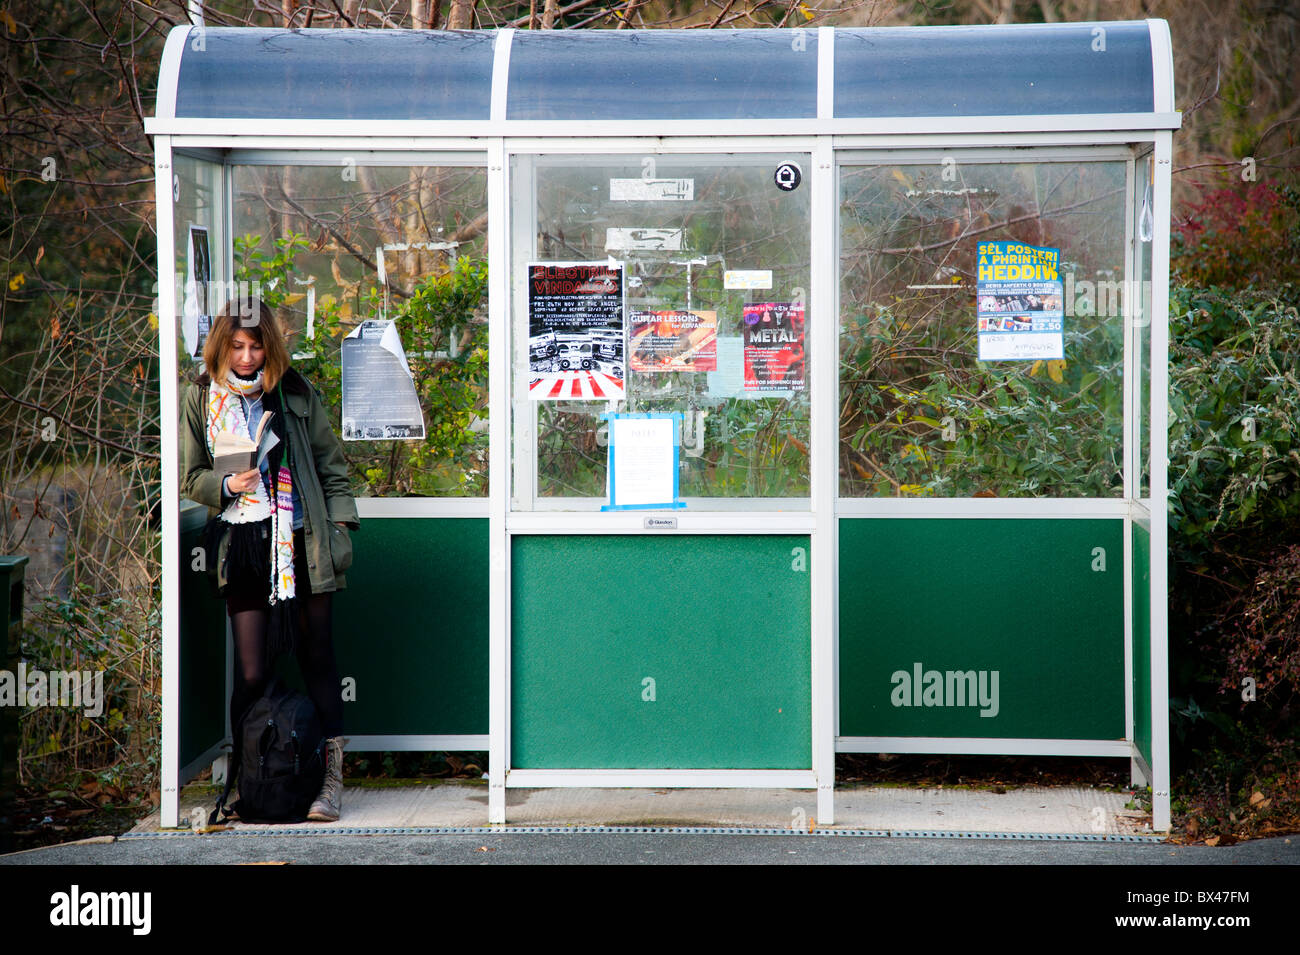 A woman student waiting for bus, reading a book, Aberystwyth Wales UK Stock Photo